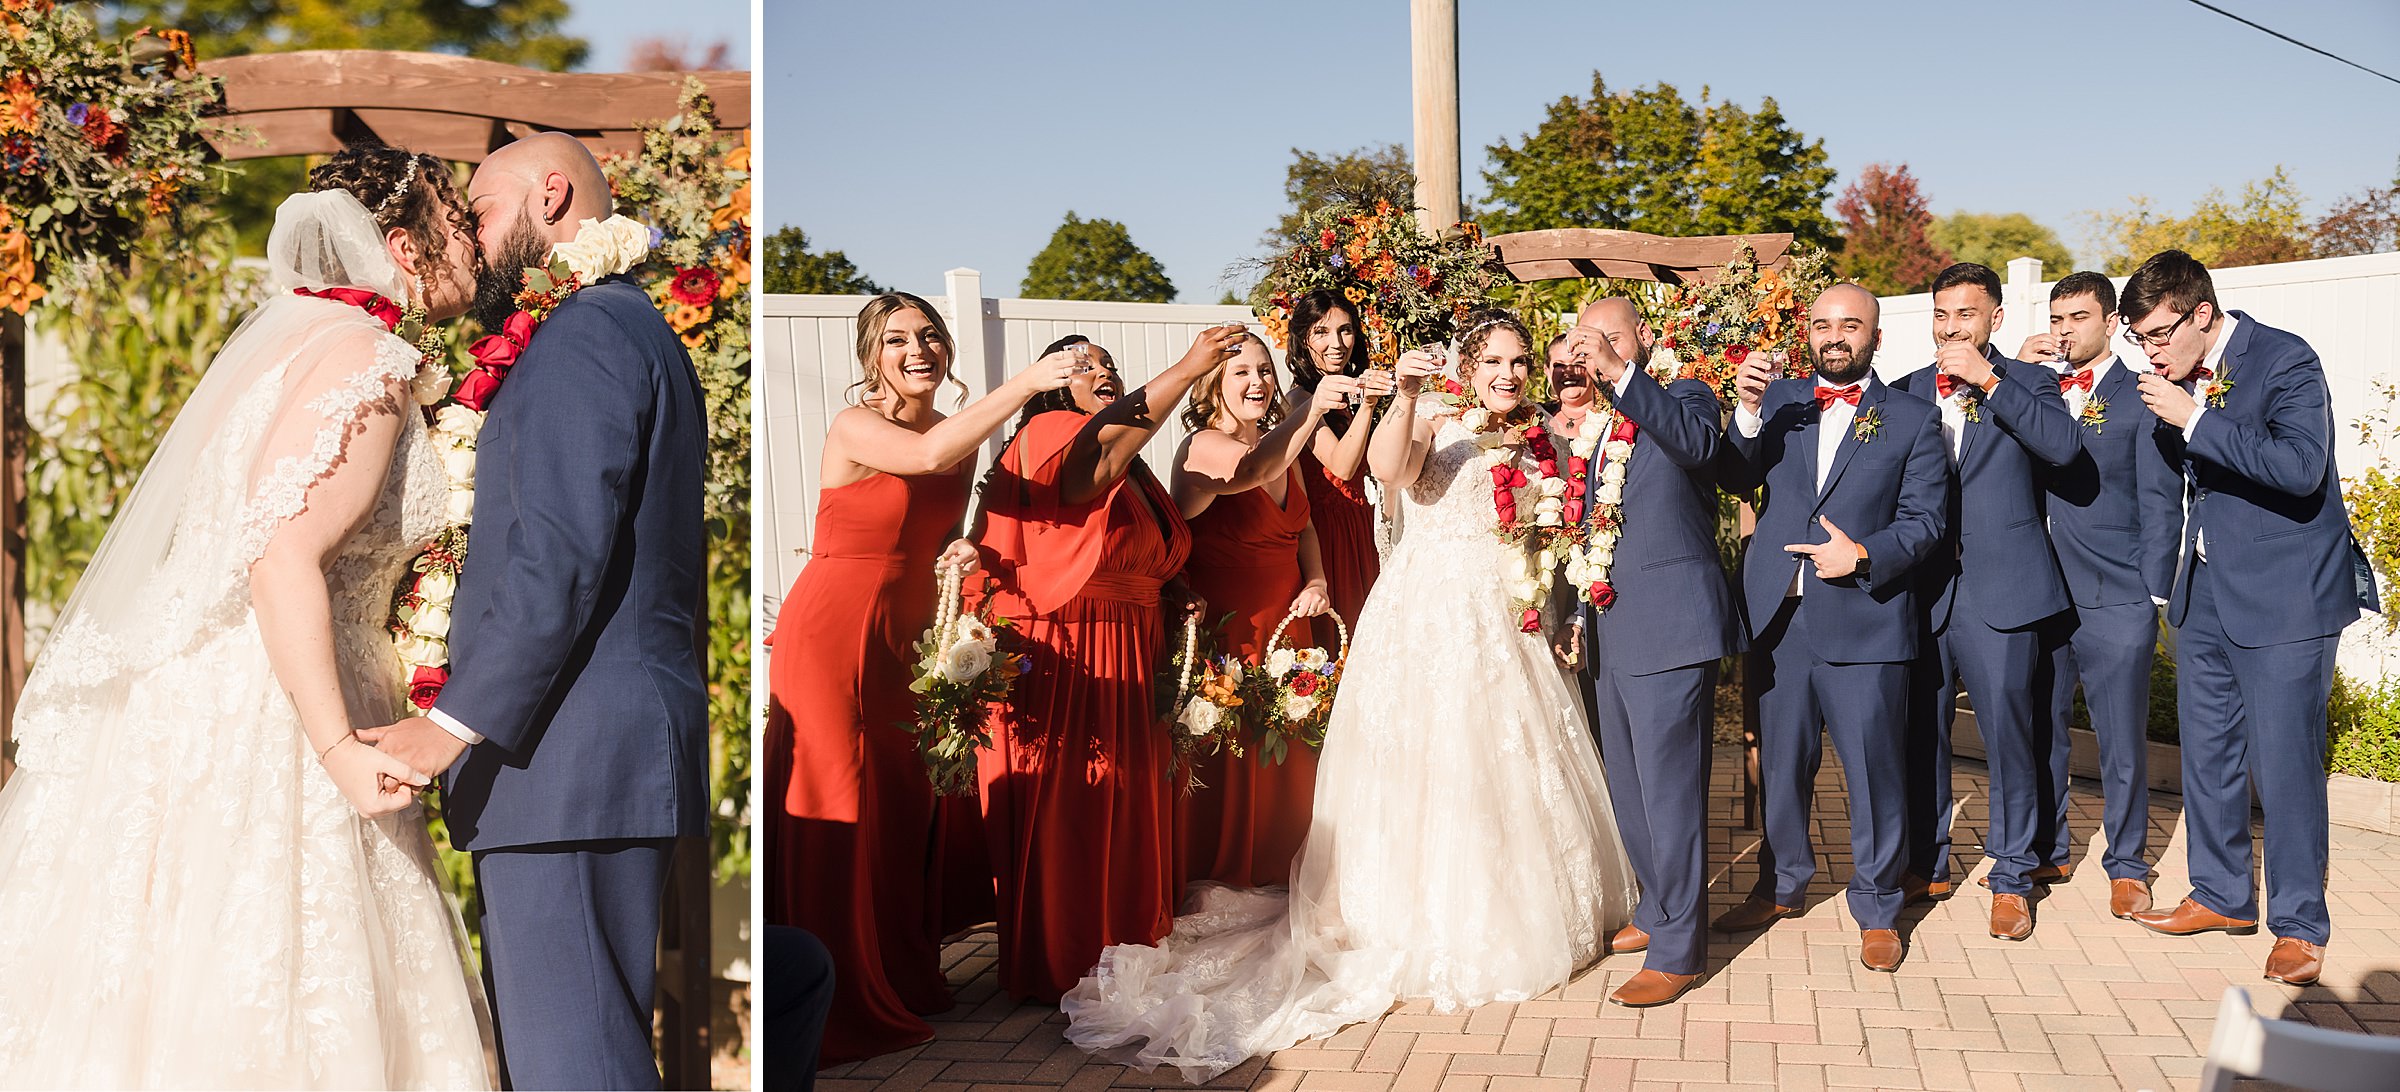 Bride and groom have their first kiss and celebrate with their bridal party during their wedding at the Legacy Building in El Paso, Illinois.